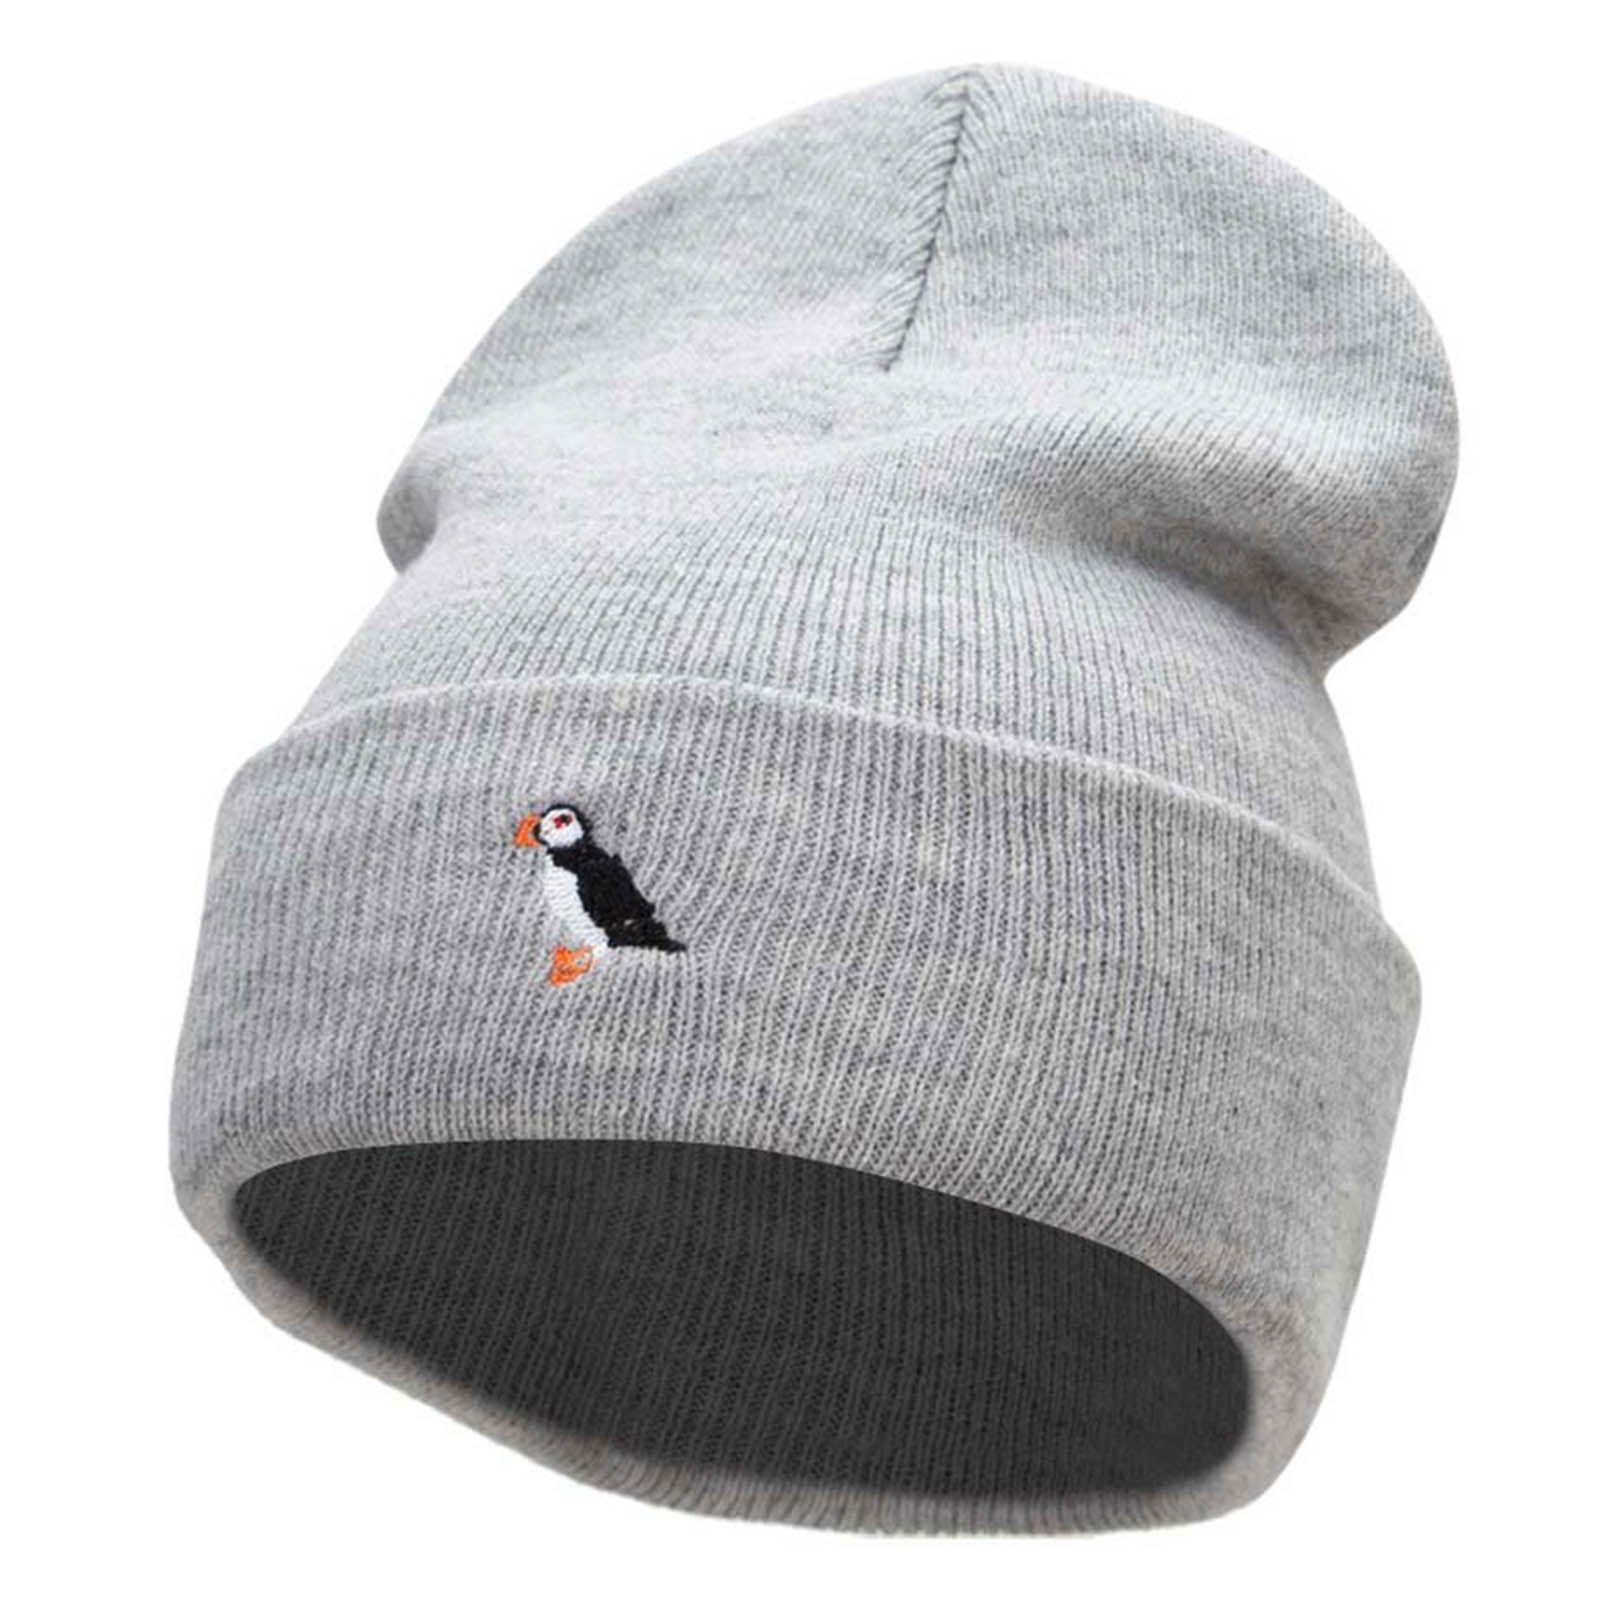 Mini Puffin Embroidered 12 Inch Long Knitted Beanie - Heather Grey OSFM